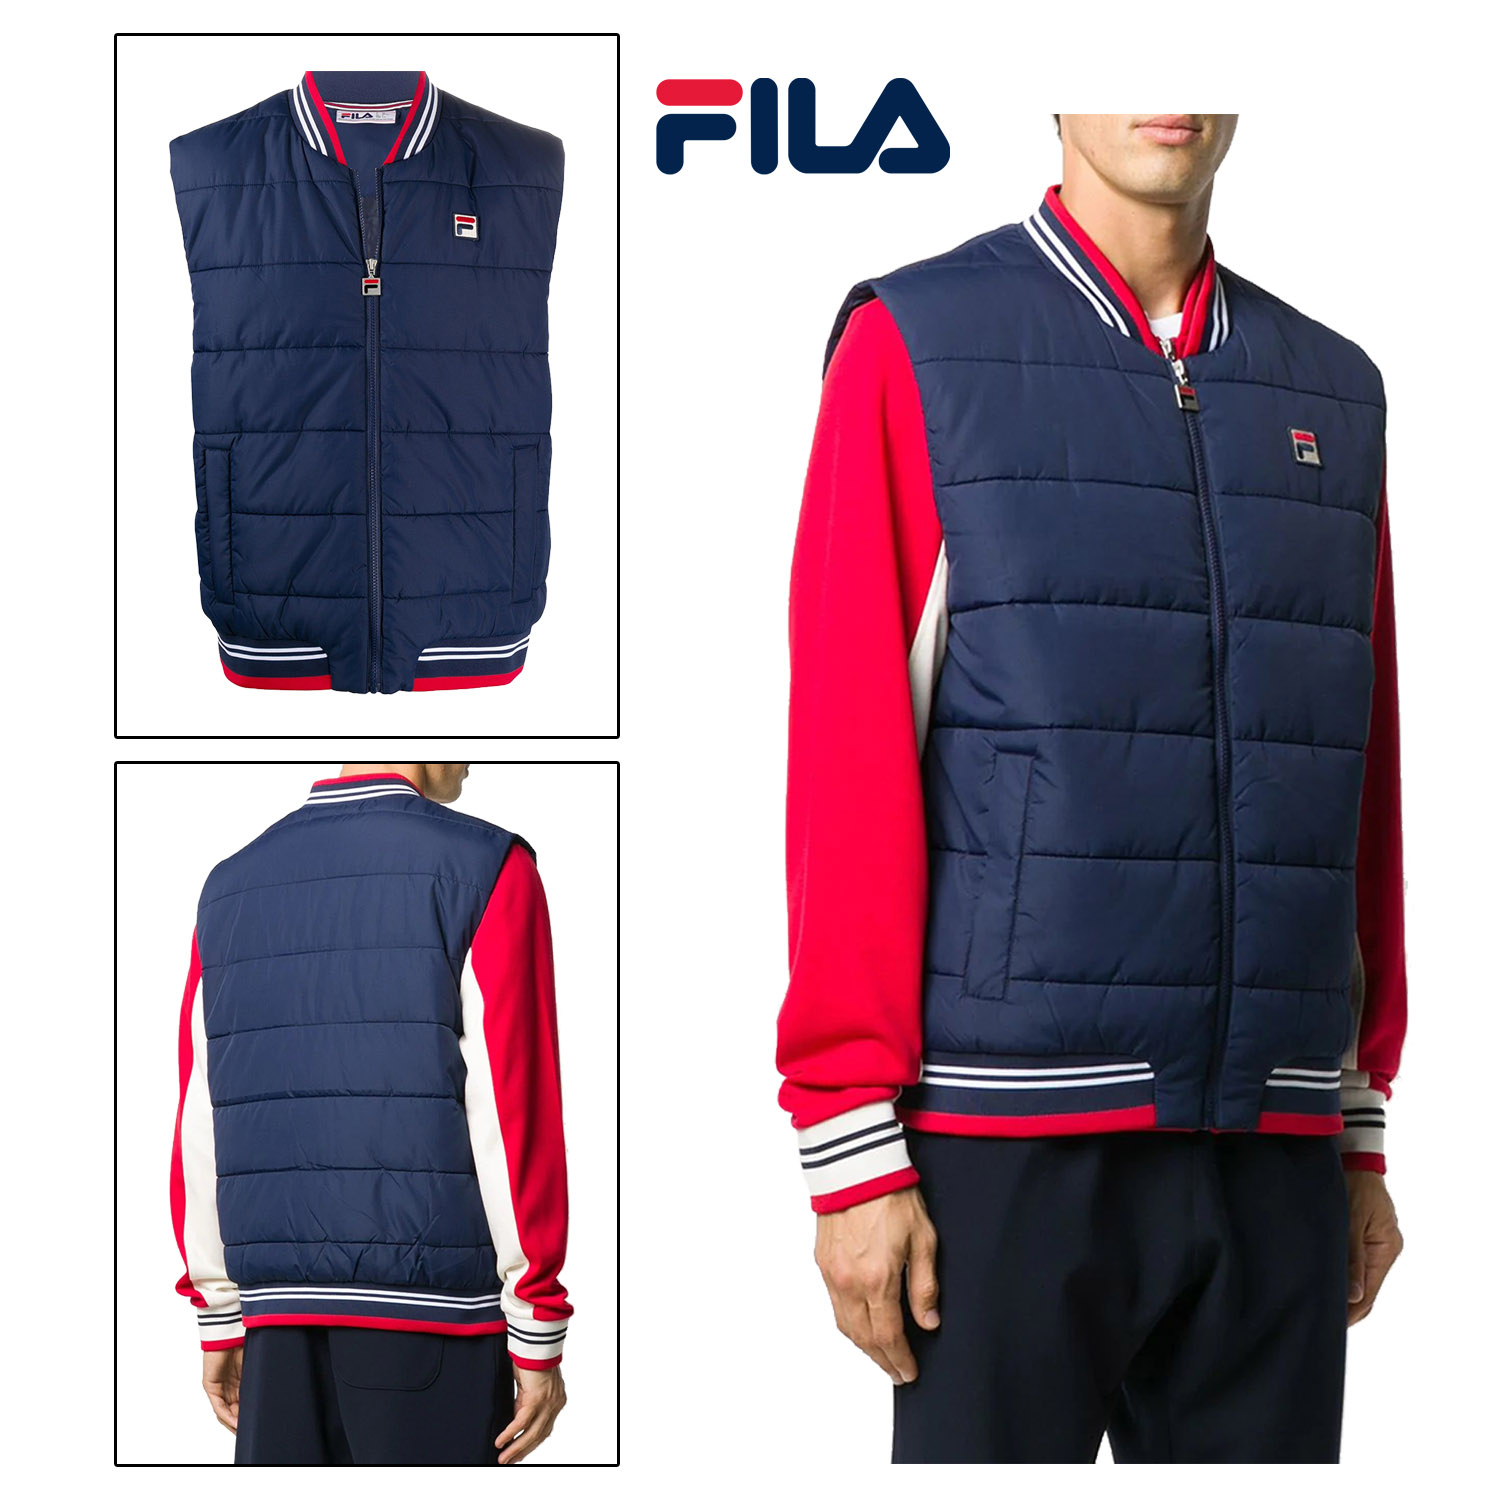 fila padded jacket with buckle fastening and chest logo